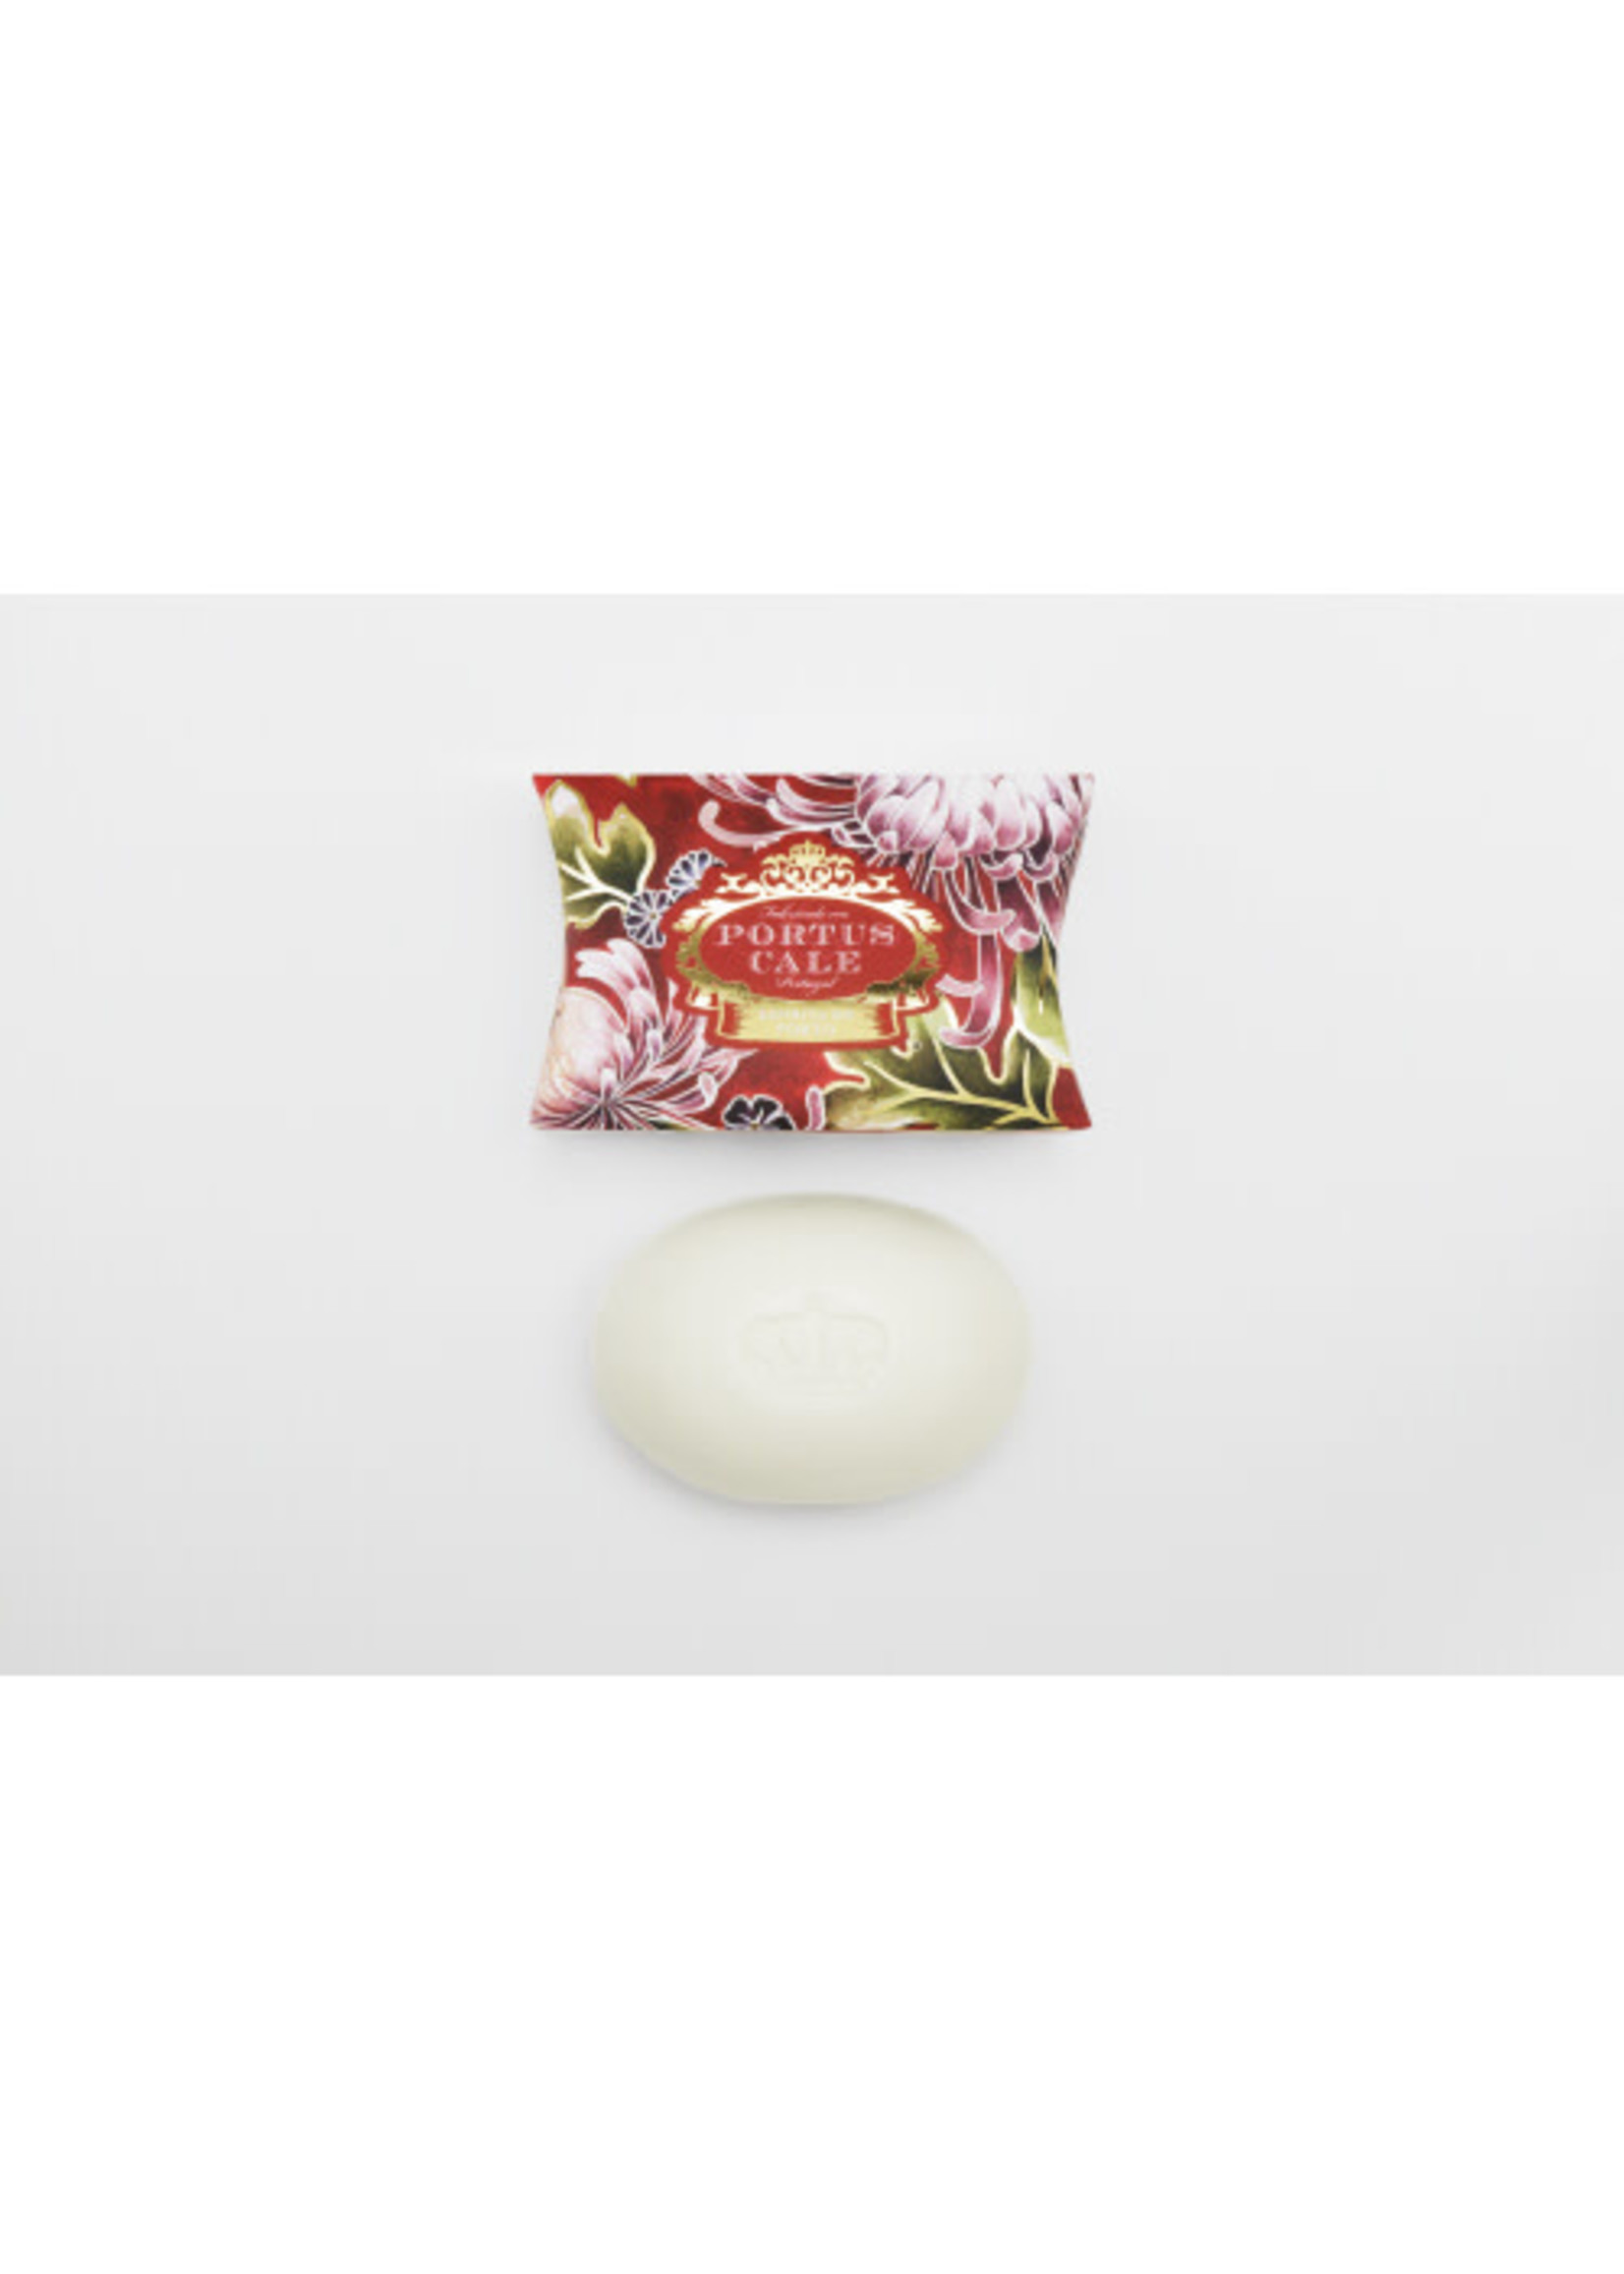 Portus Cale Ruby Red 40g Soap